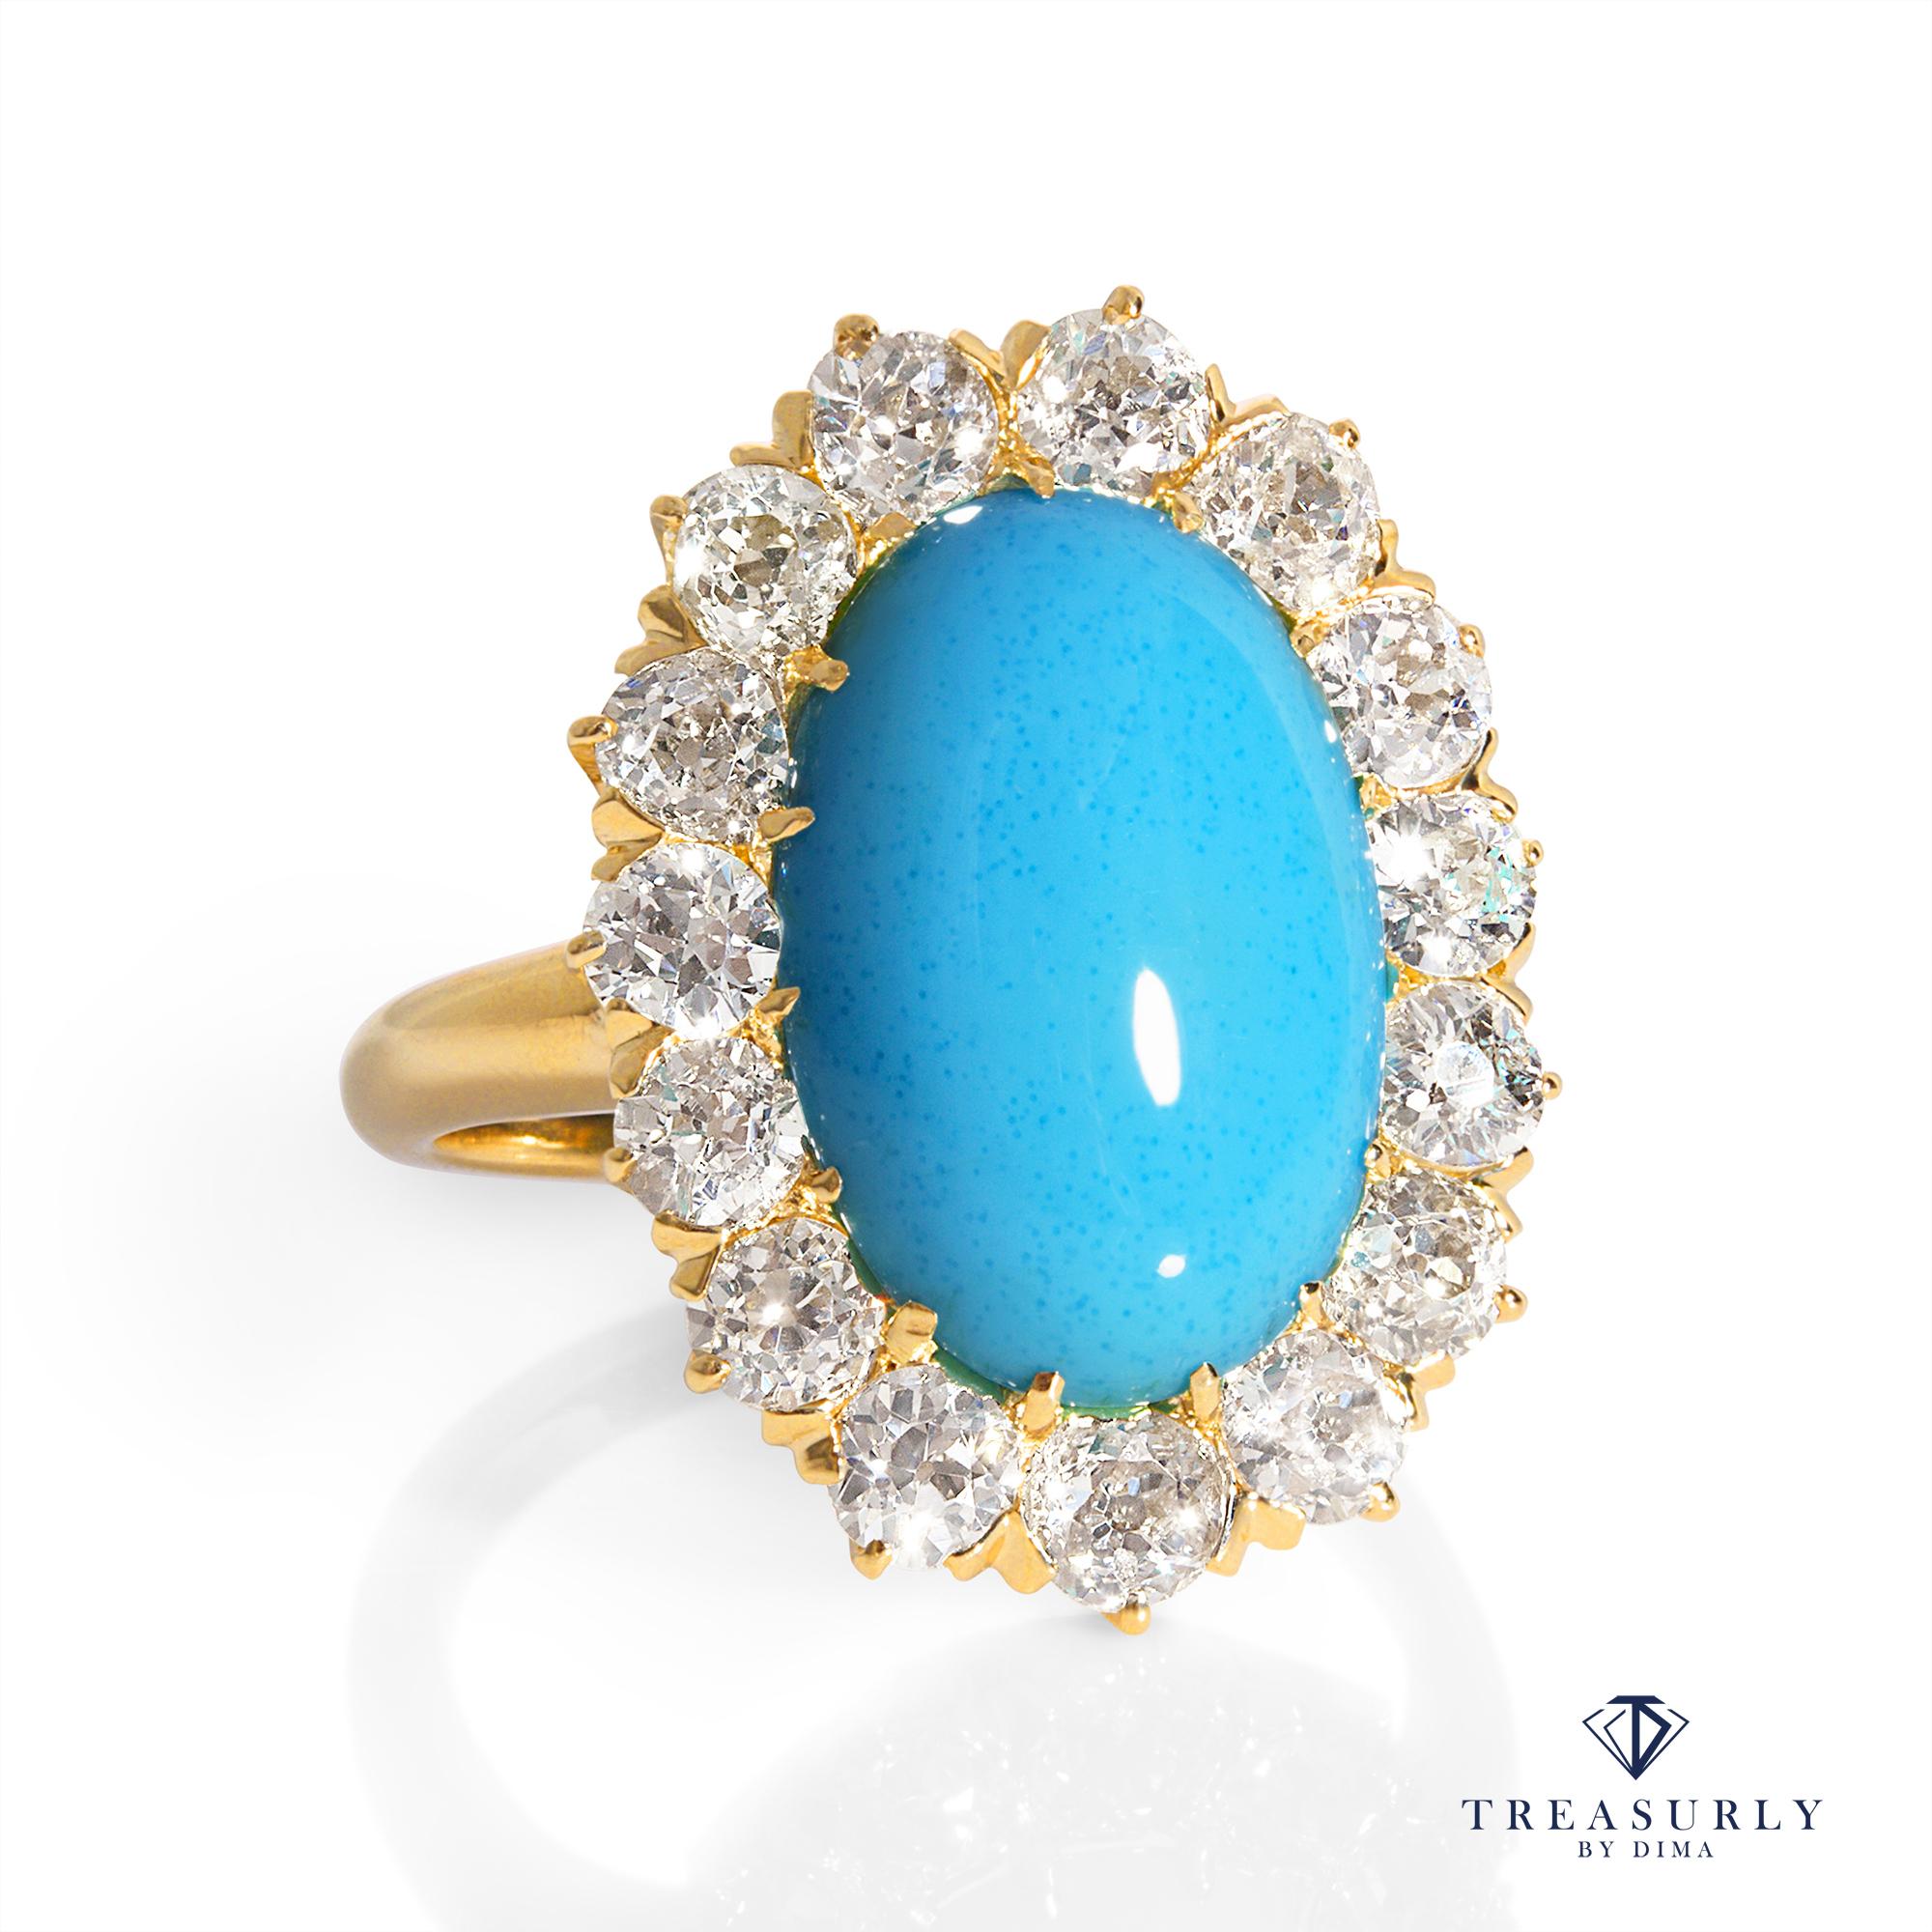 A Beautiful Authentic Classic VICTORIAN Turquoise and Diamonds Cluster Ring, hand-fabricated in 14K Yellow Gold, CIRCA 1890.  

A bright Turquoise oval cabochon centers a glittering halo of 15 OLD MINE Cut Diamonds in this stunning Late Victorian